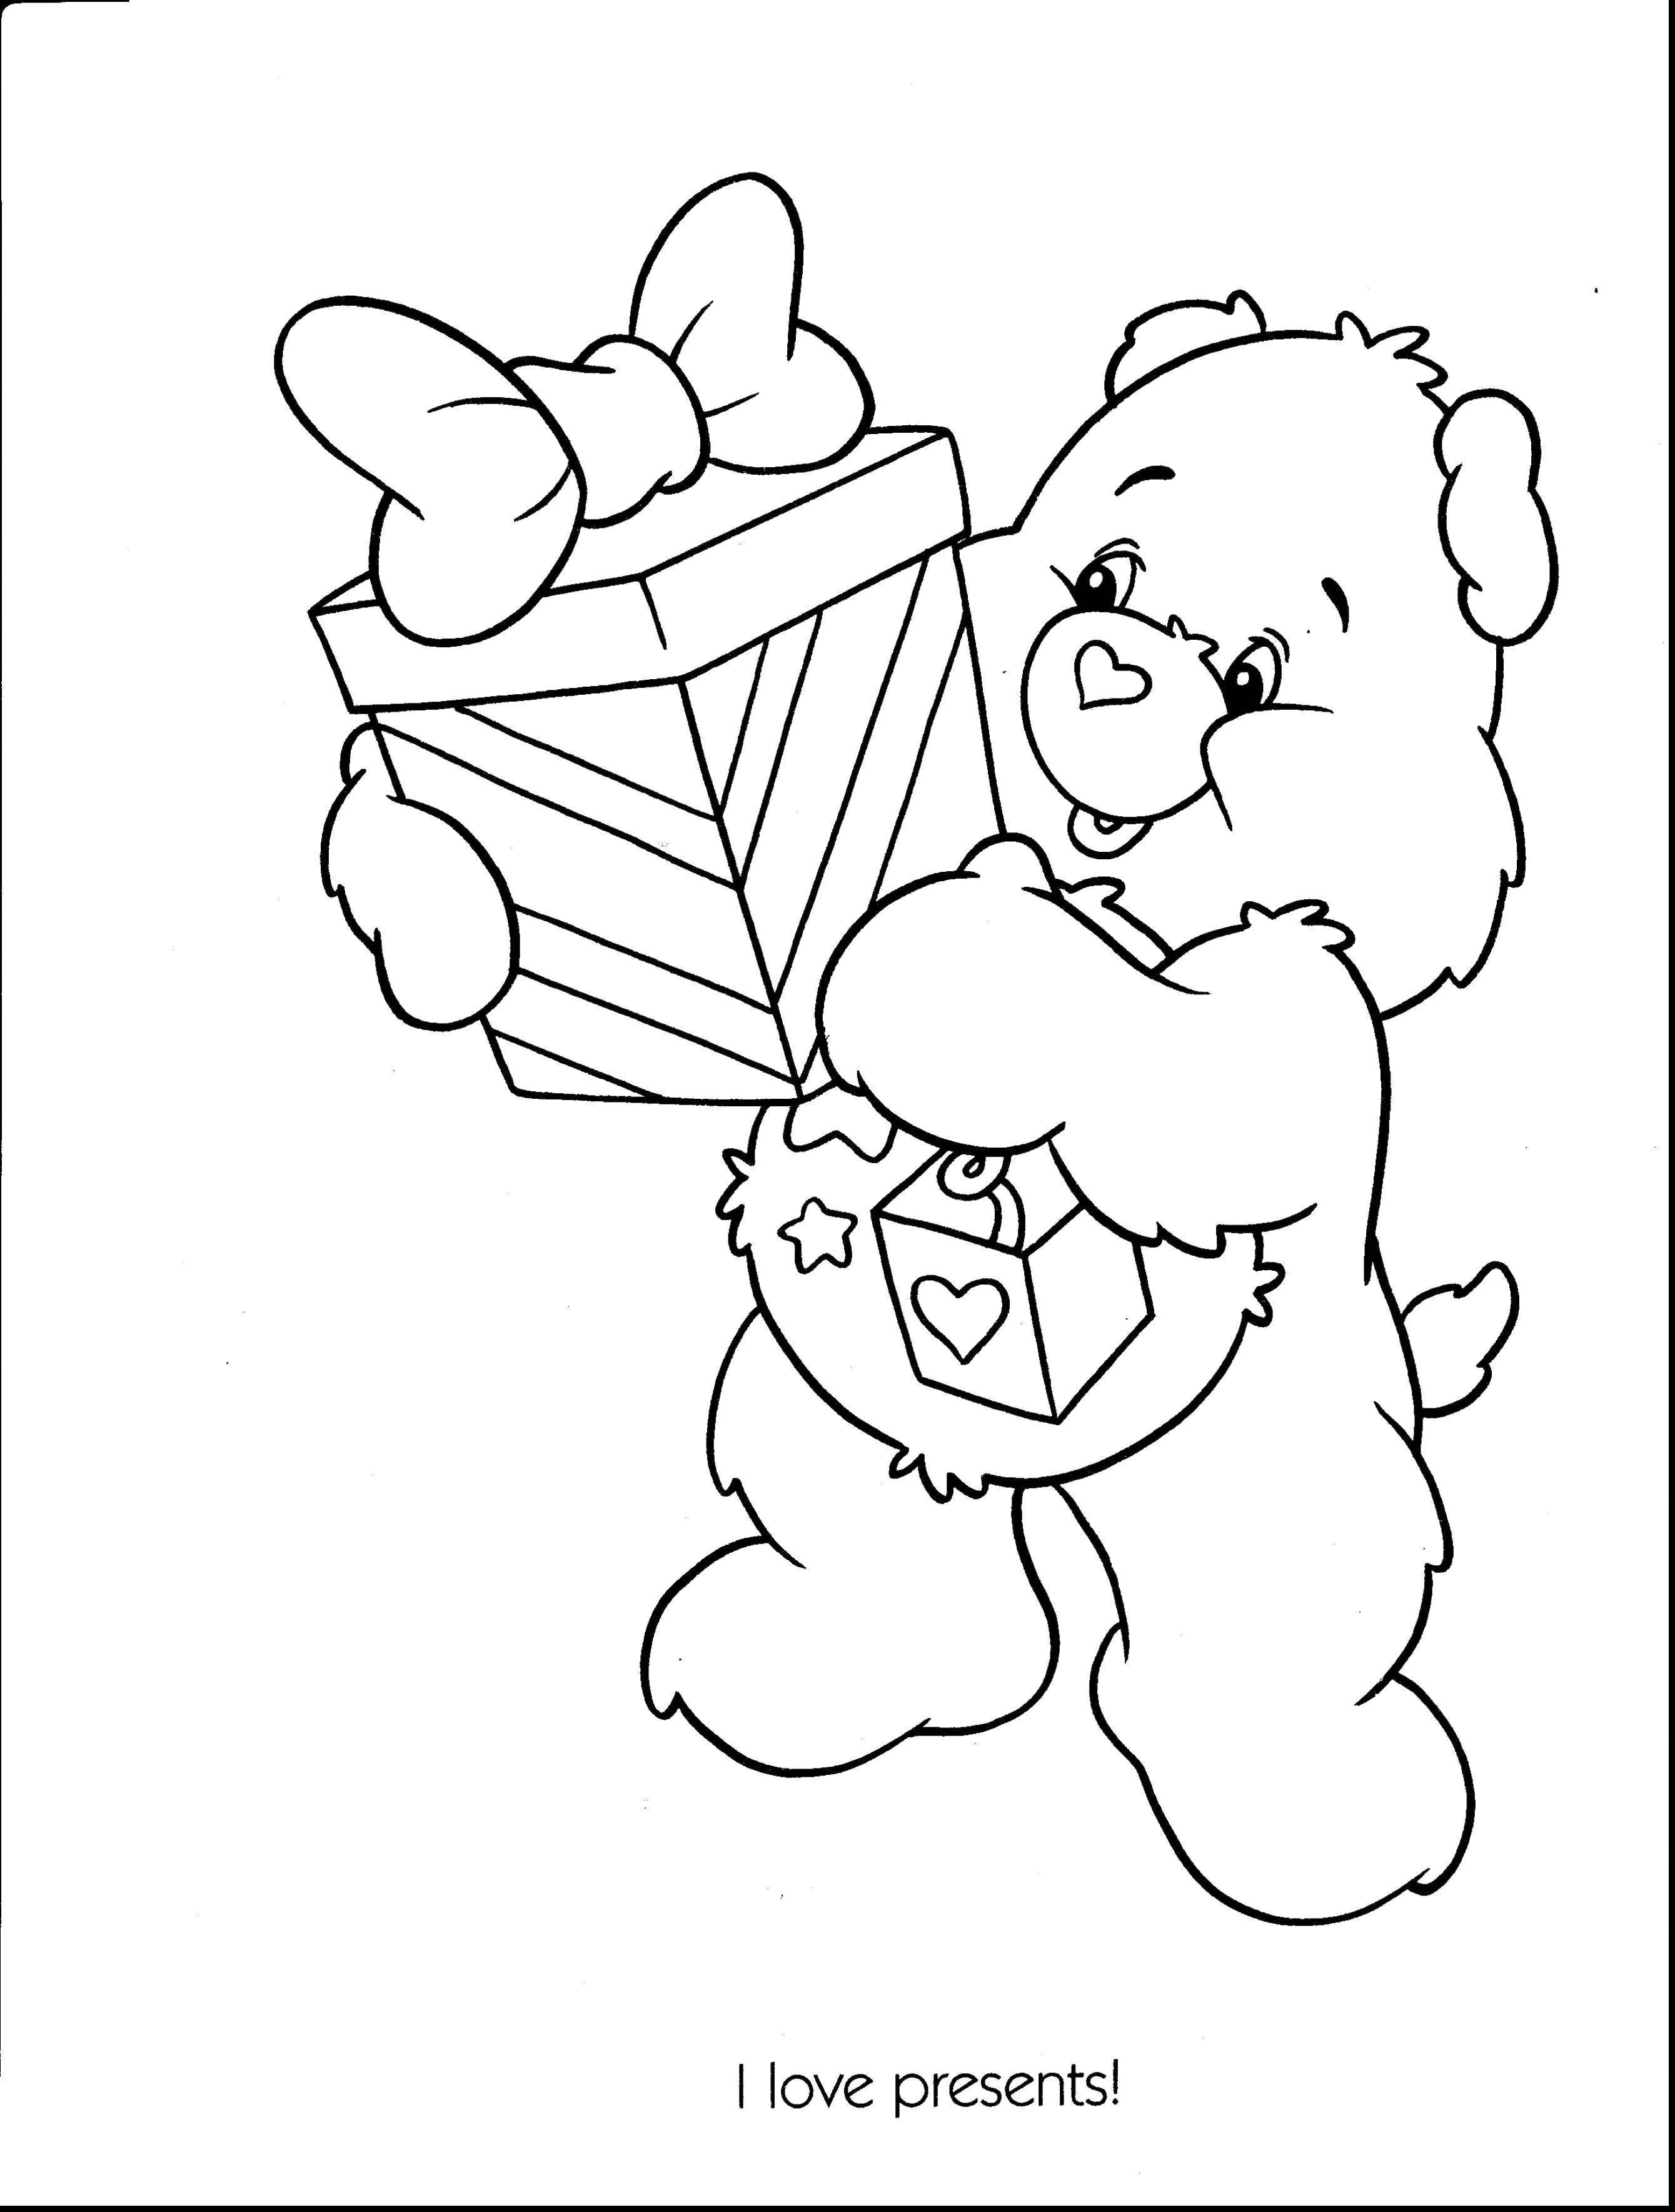 Coloring I love gifts. Category toys. Tags:  bear , gifts.